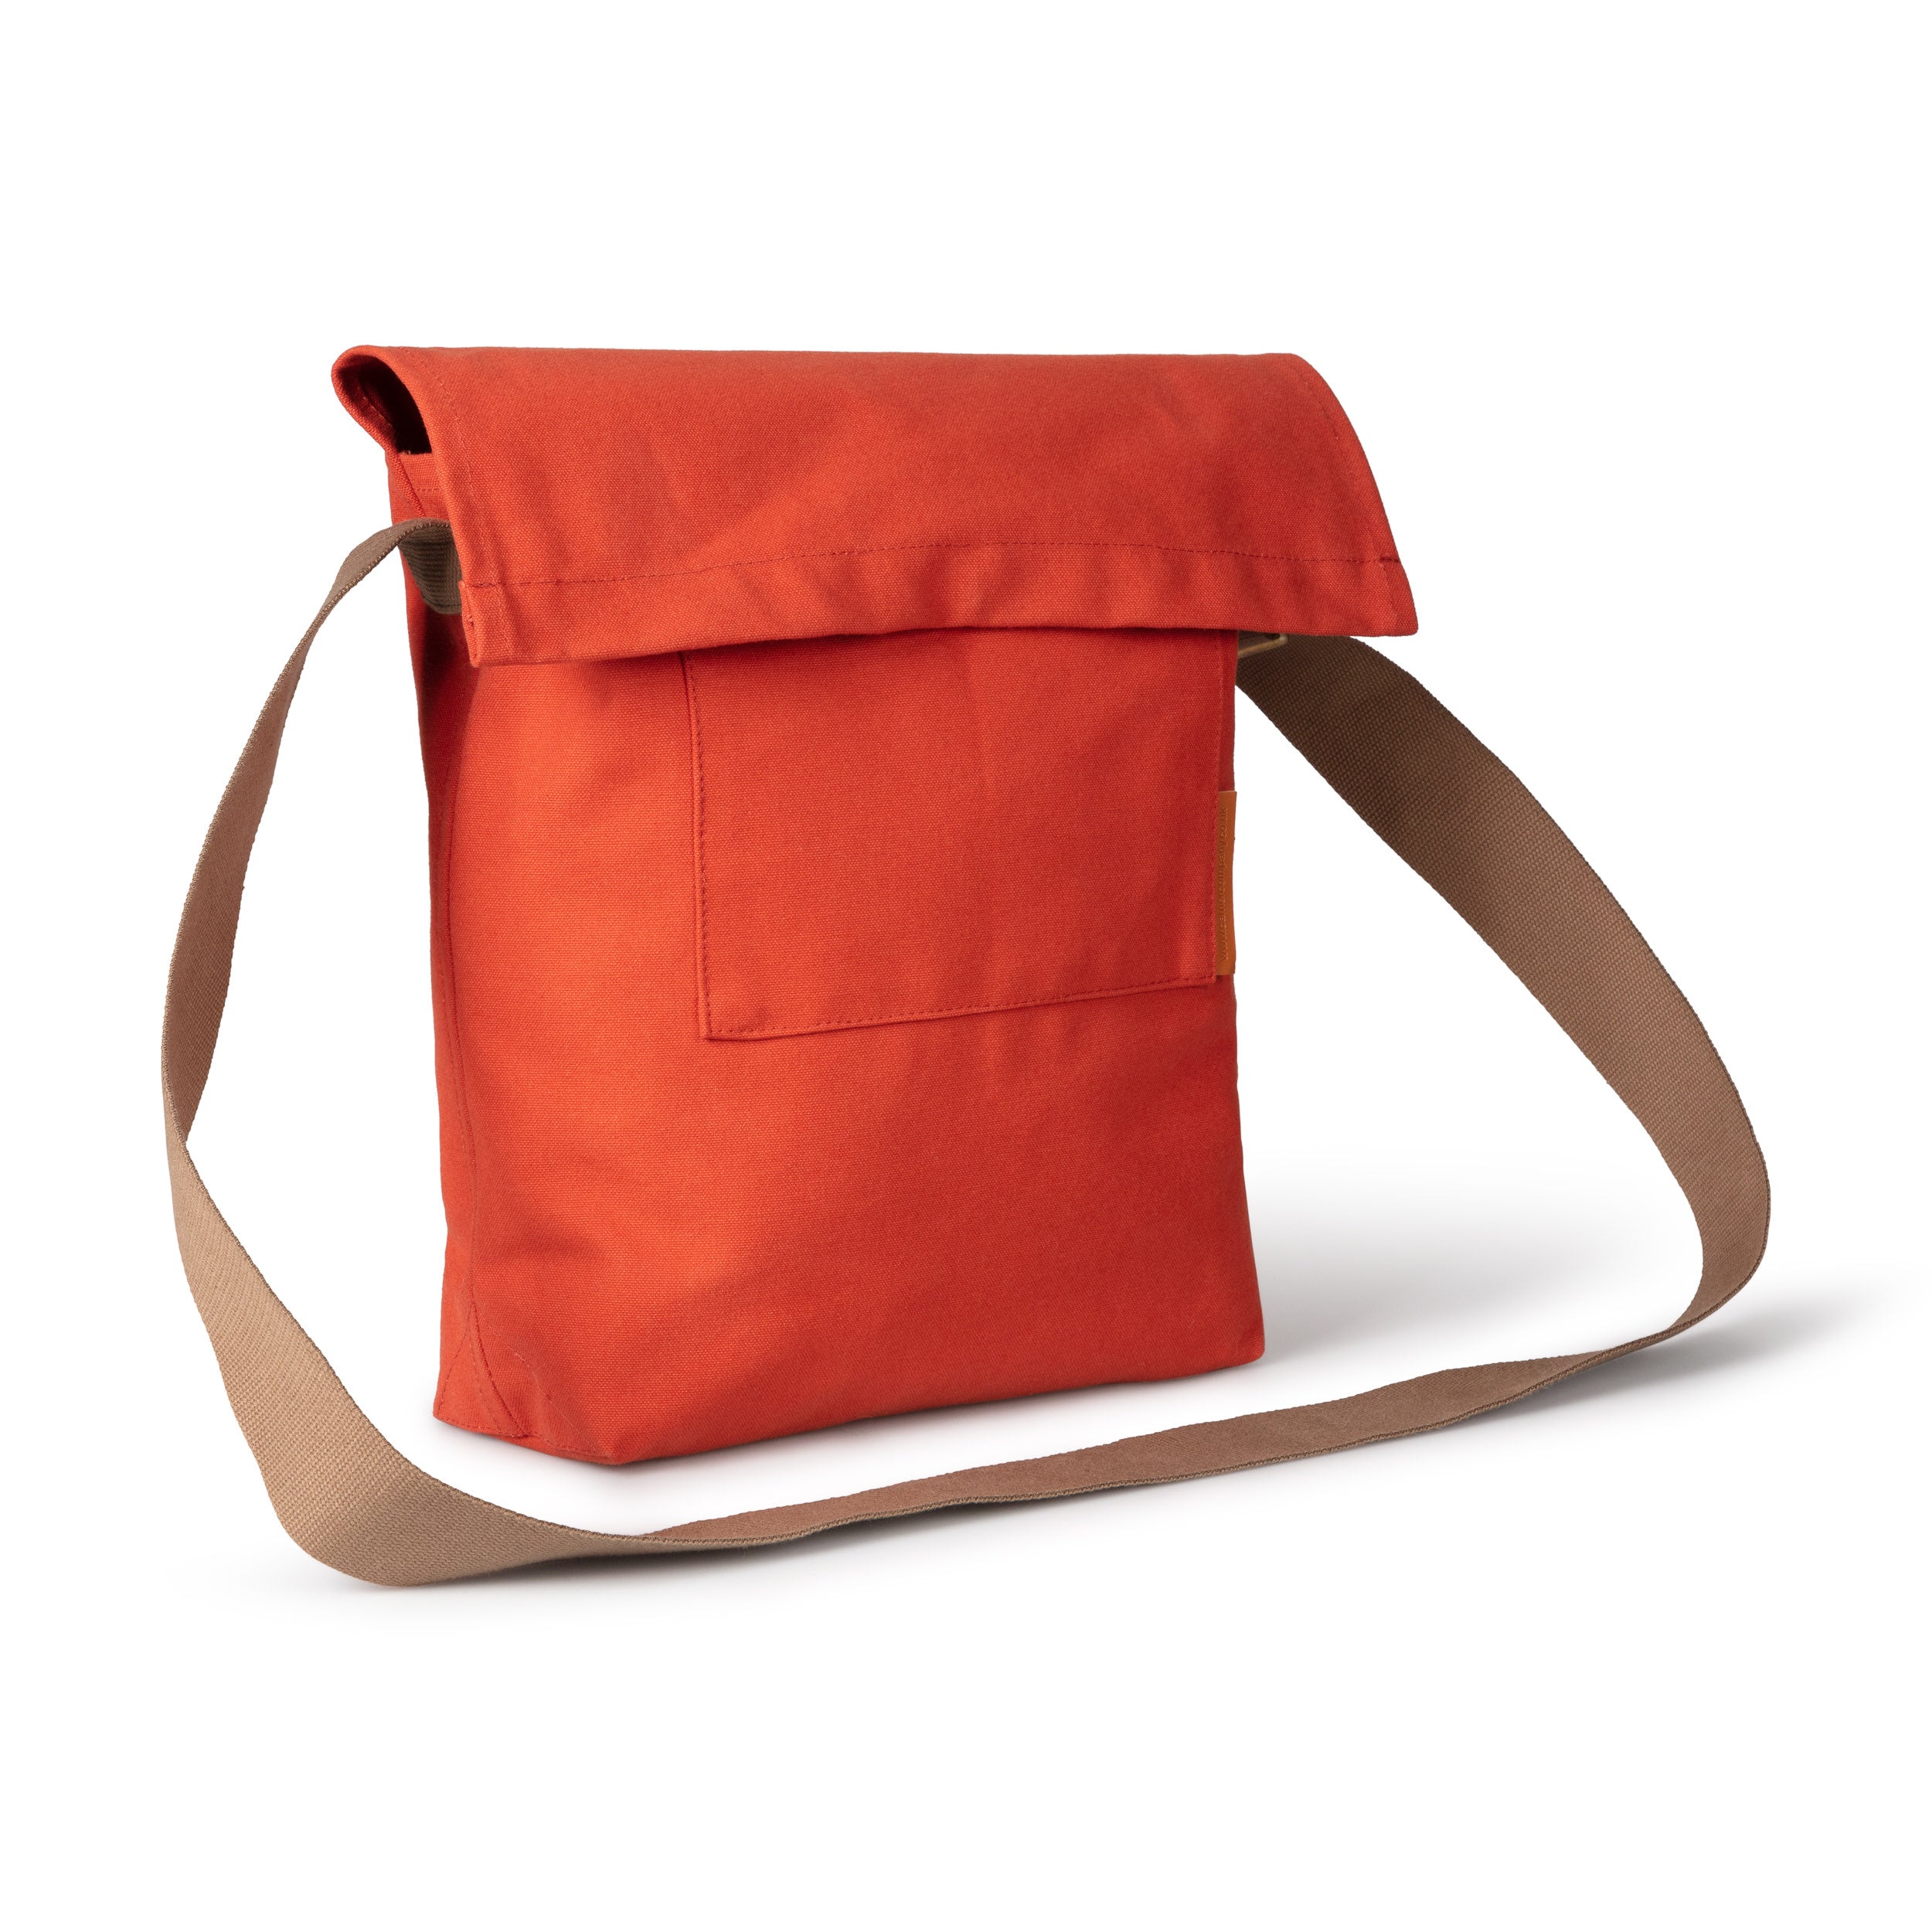 Carrier Company Small Satchel in Orange